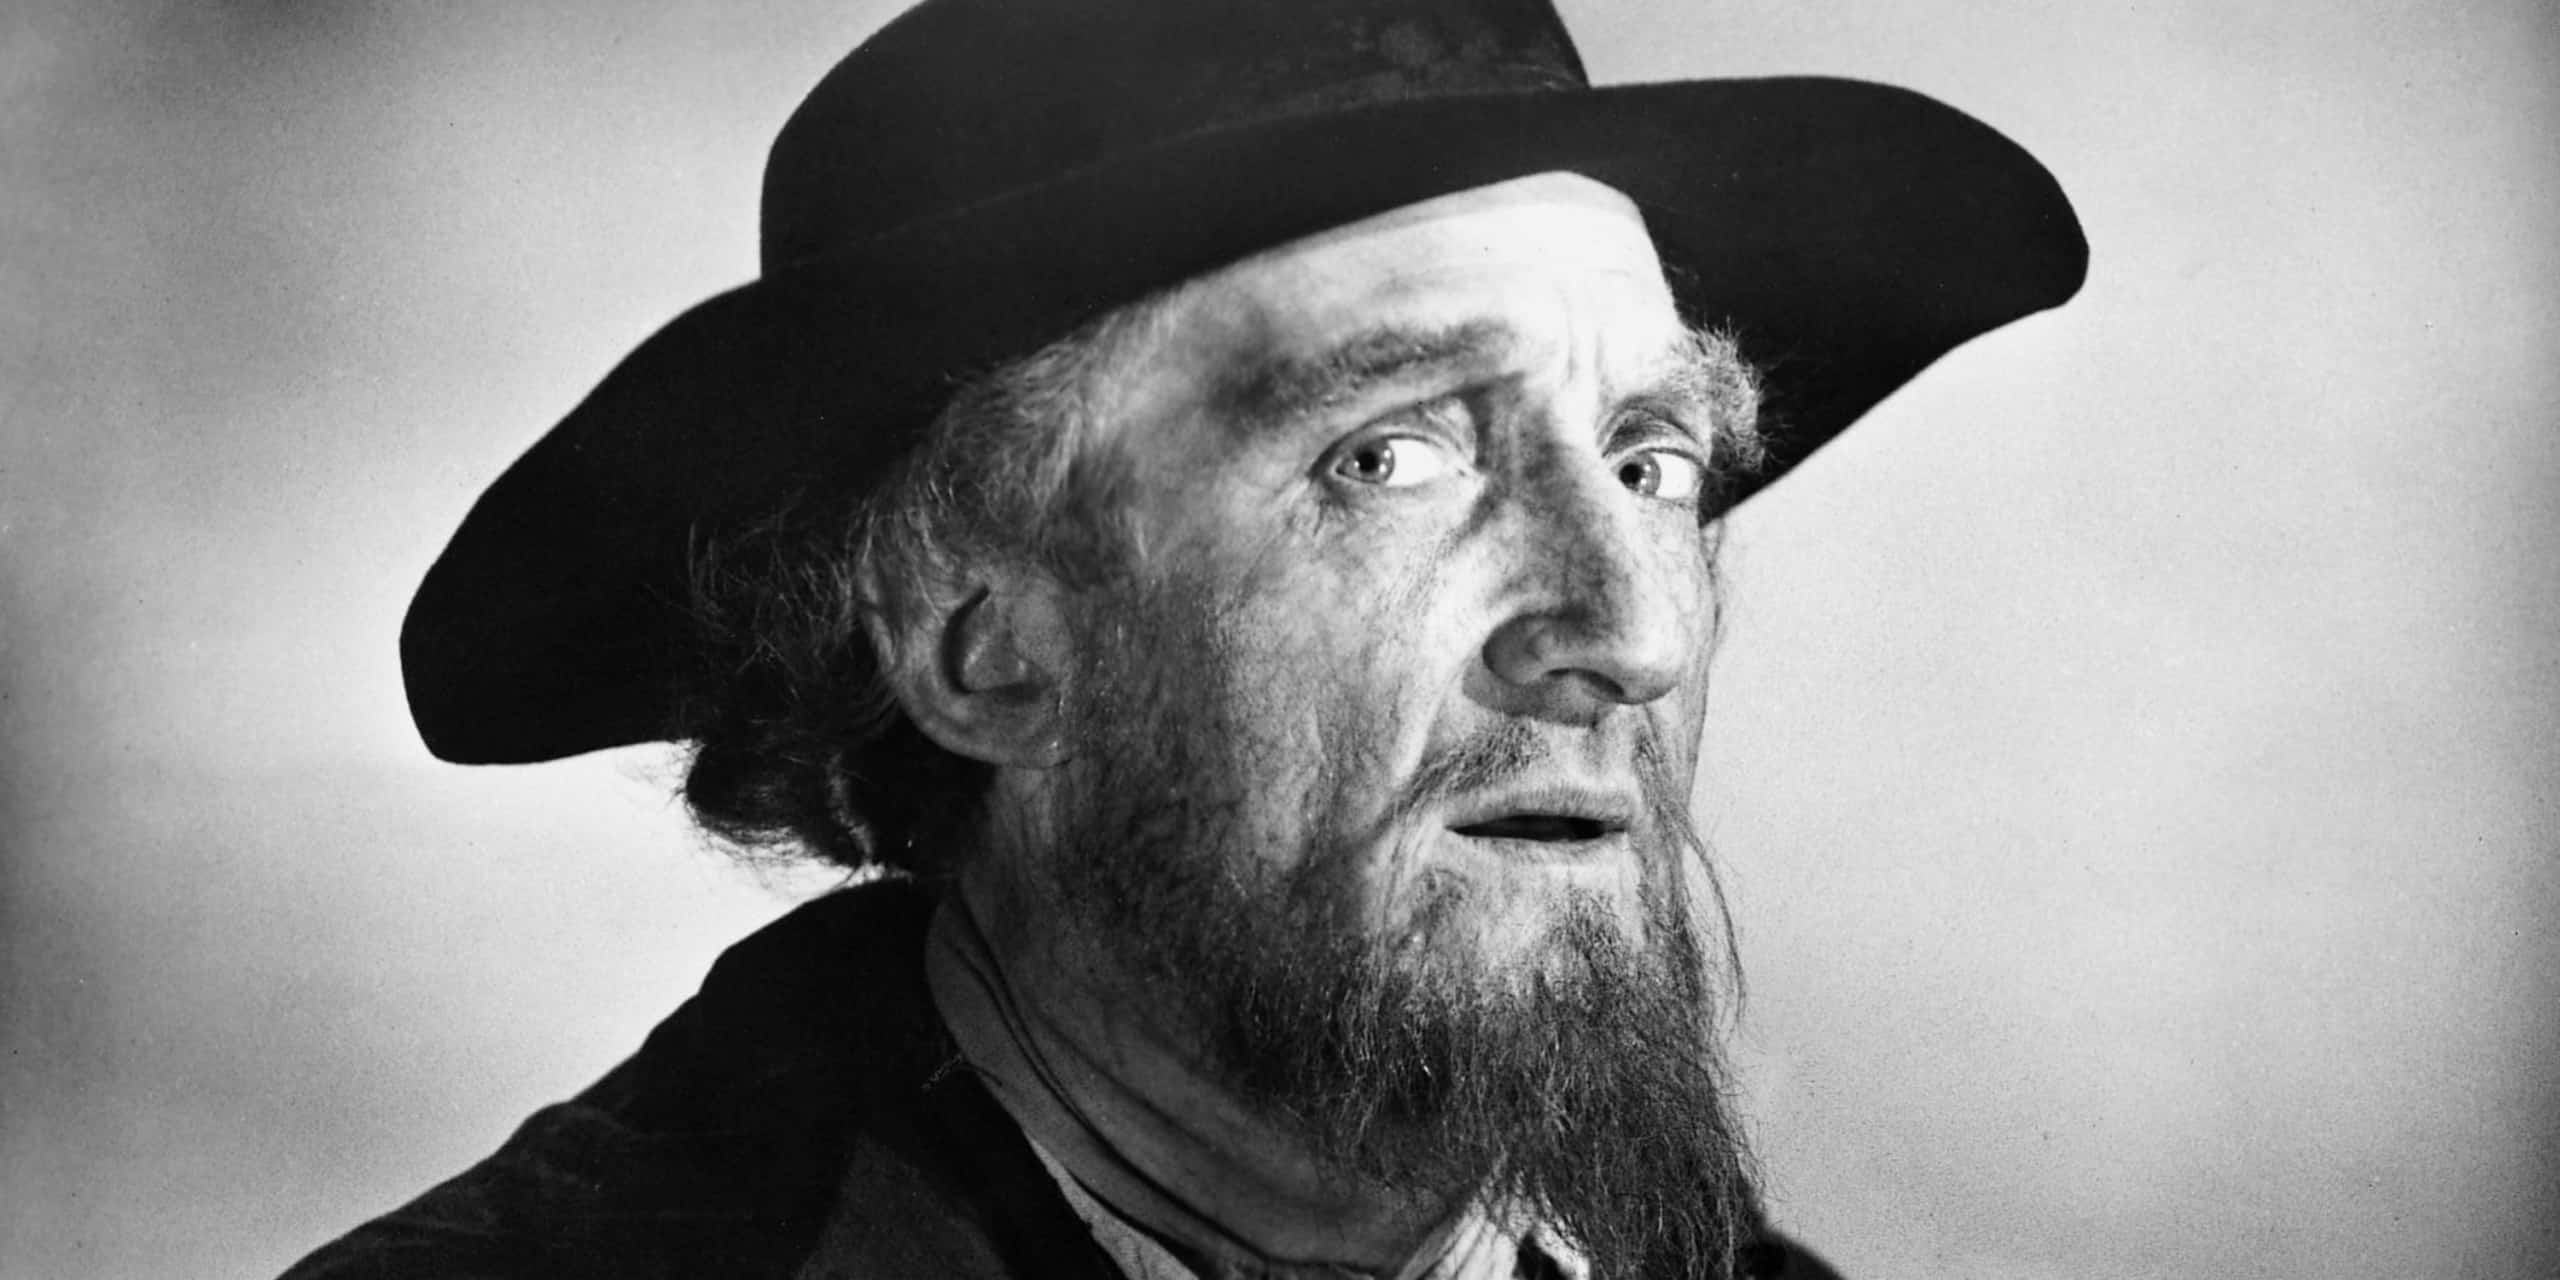 Ron Moody as Fagin in Oliver Twist, black and white